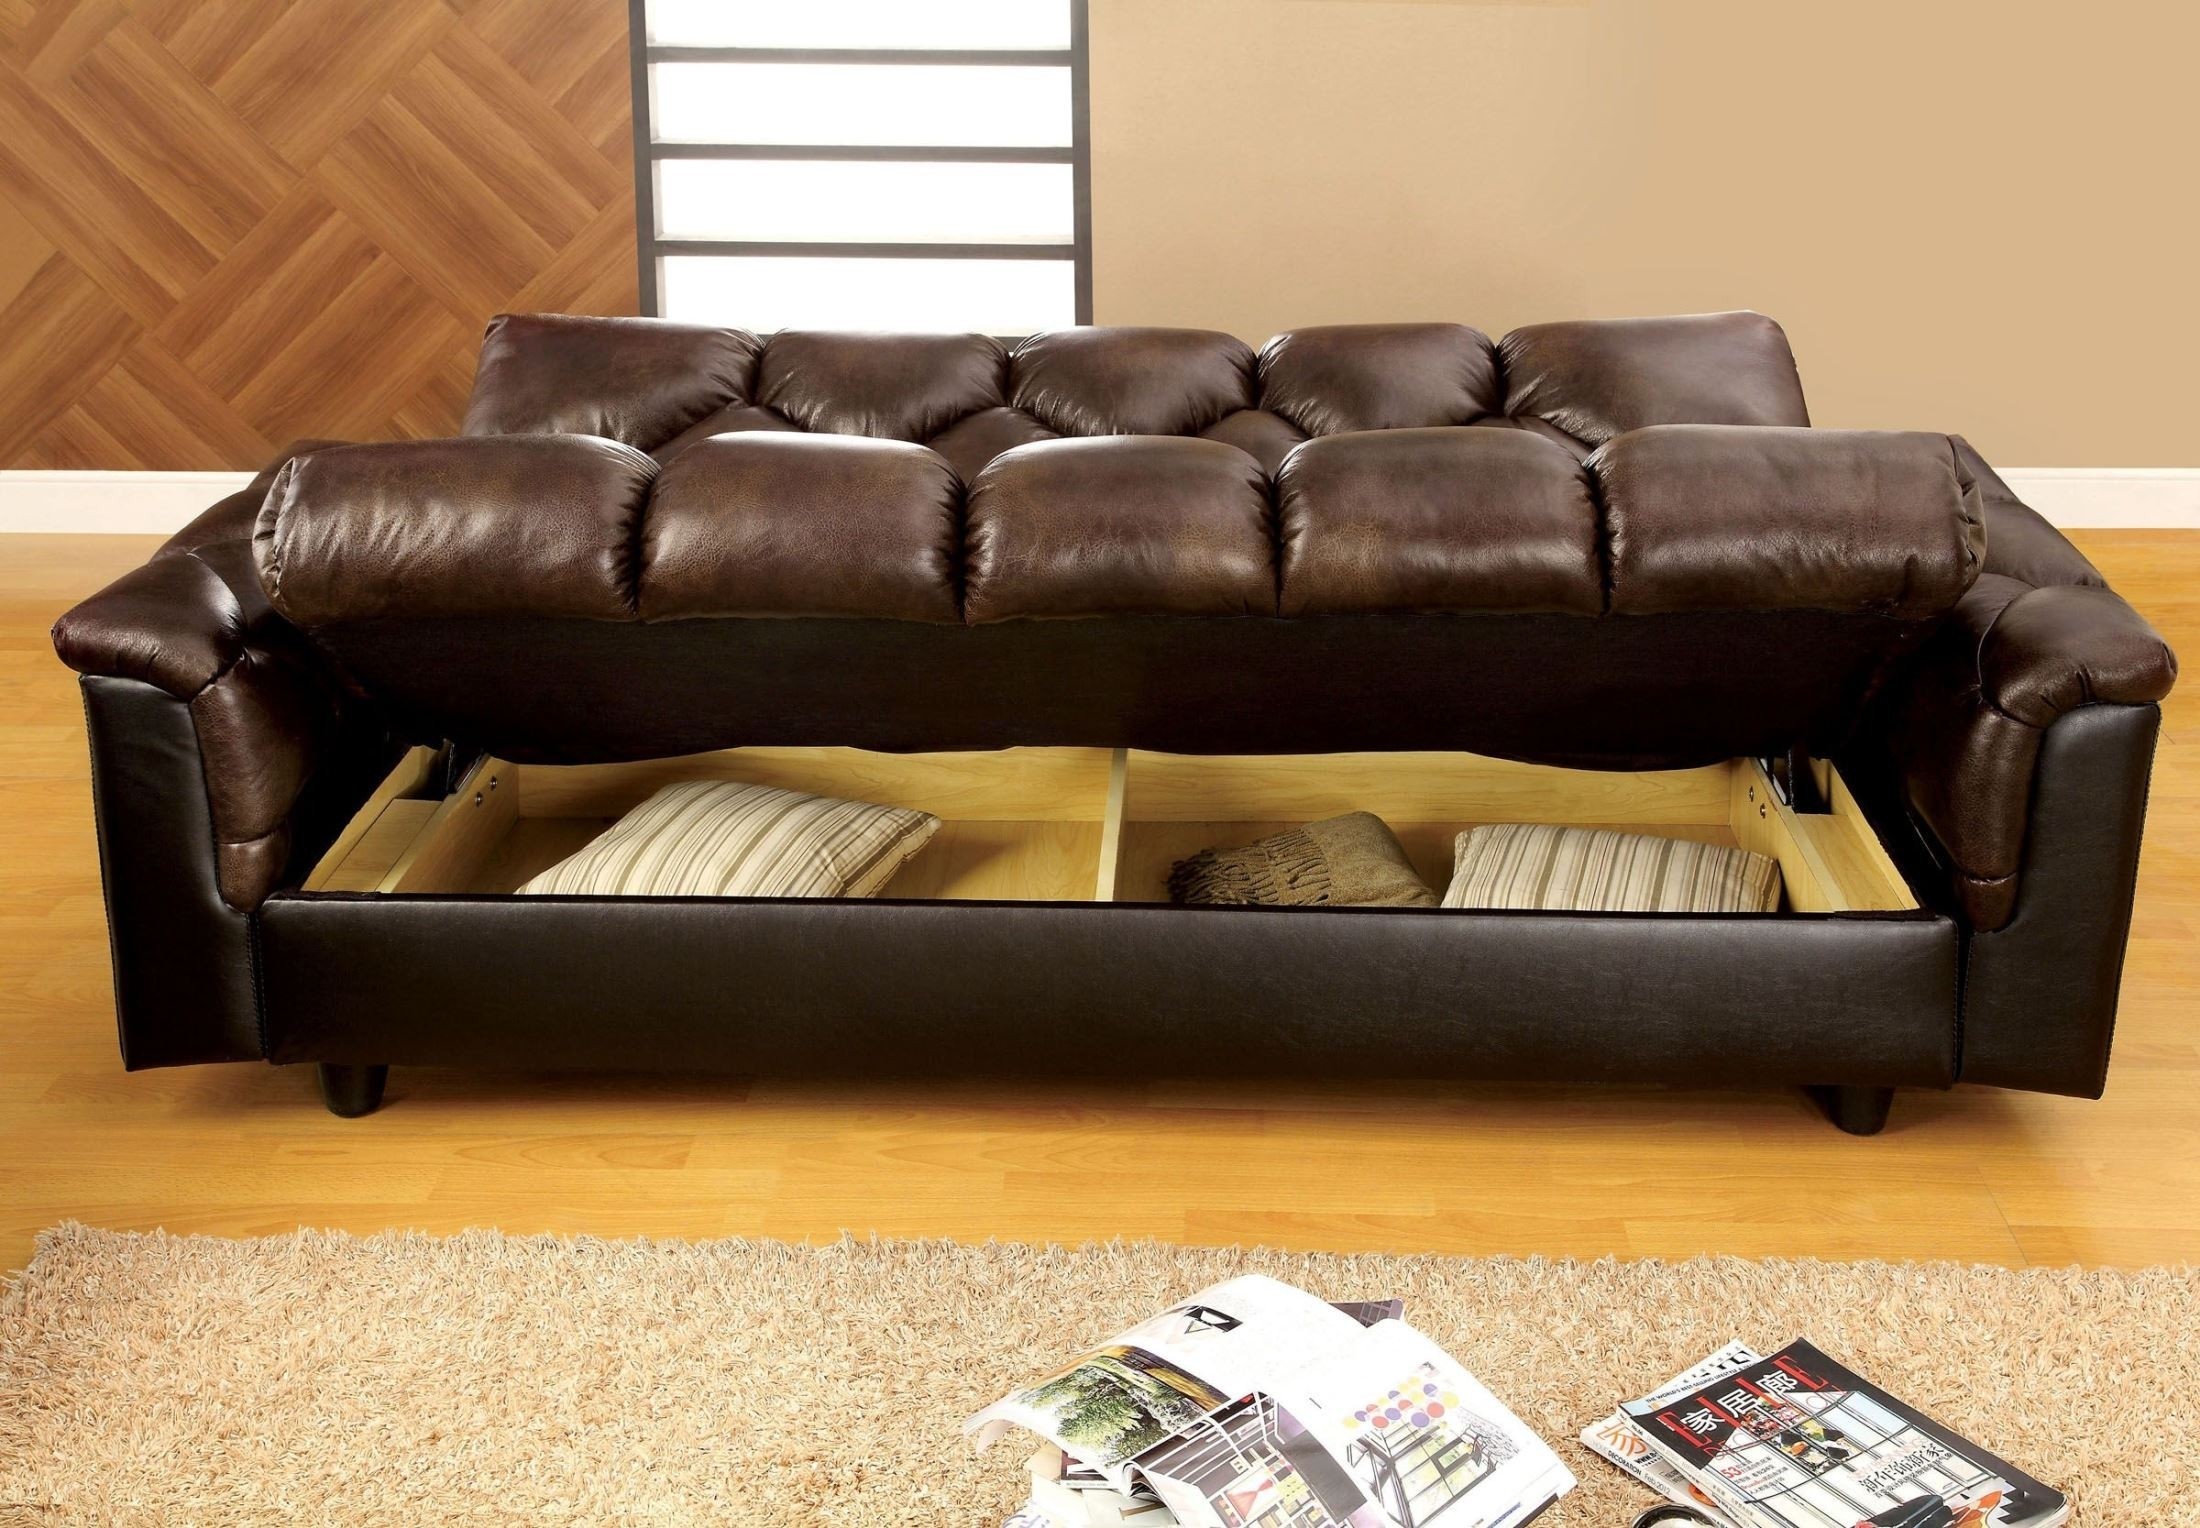 Bowie brown leather like futon storage sofa from furniture